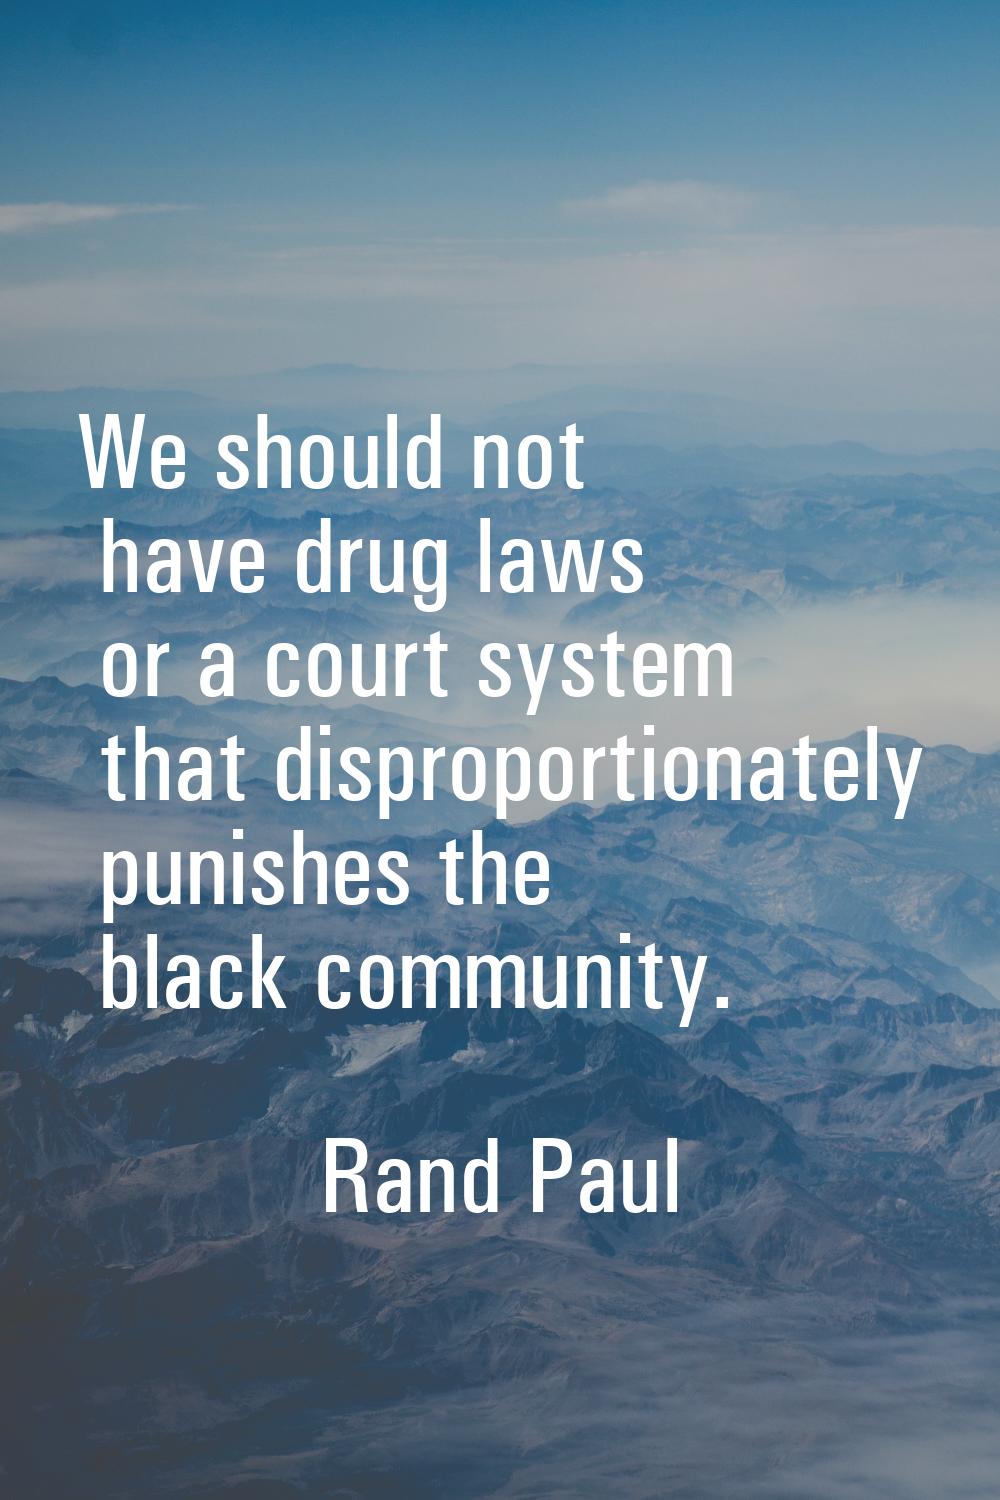 We should not have drug laws or a court system that disproportionately punishes the black community